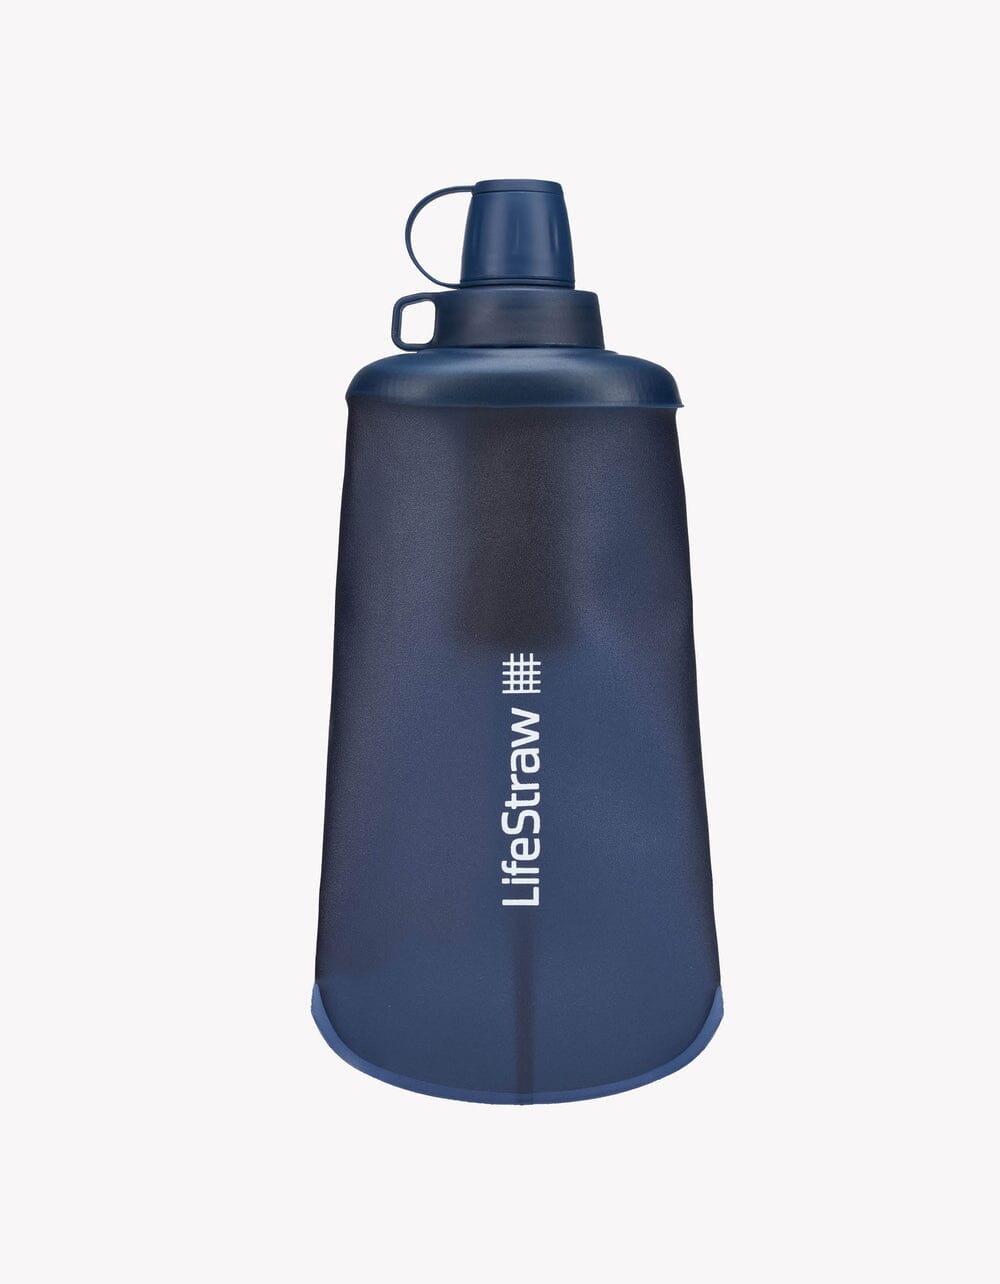 LifeStraw Peak Series Collapsible Squeeze Bottle With Filter Mountain Blue 650 mL 